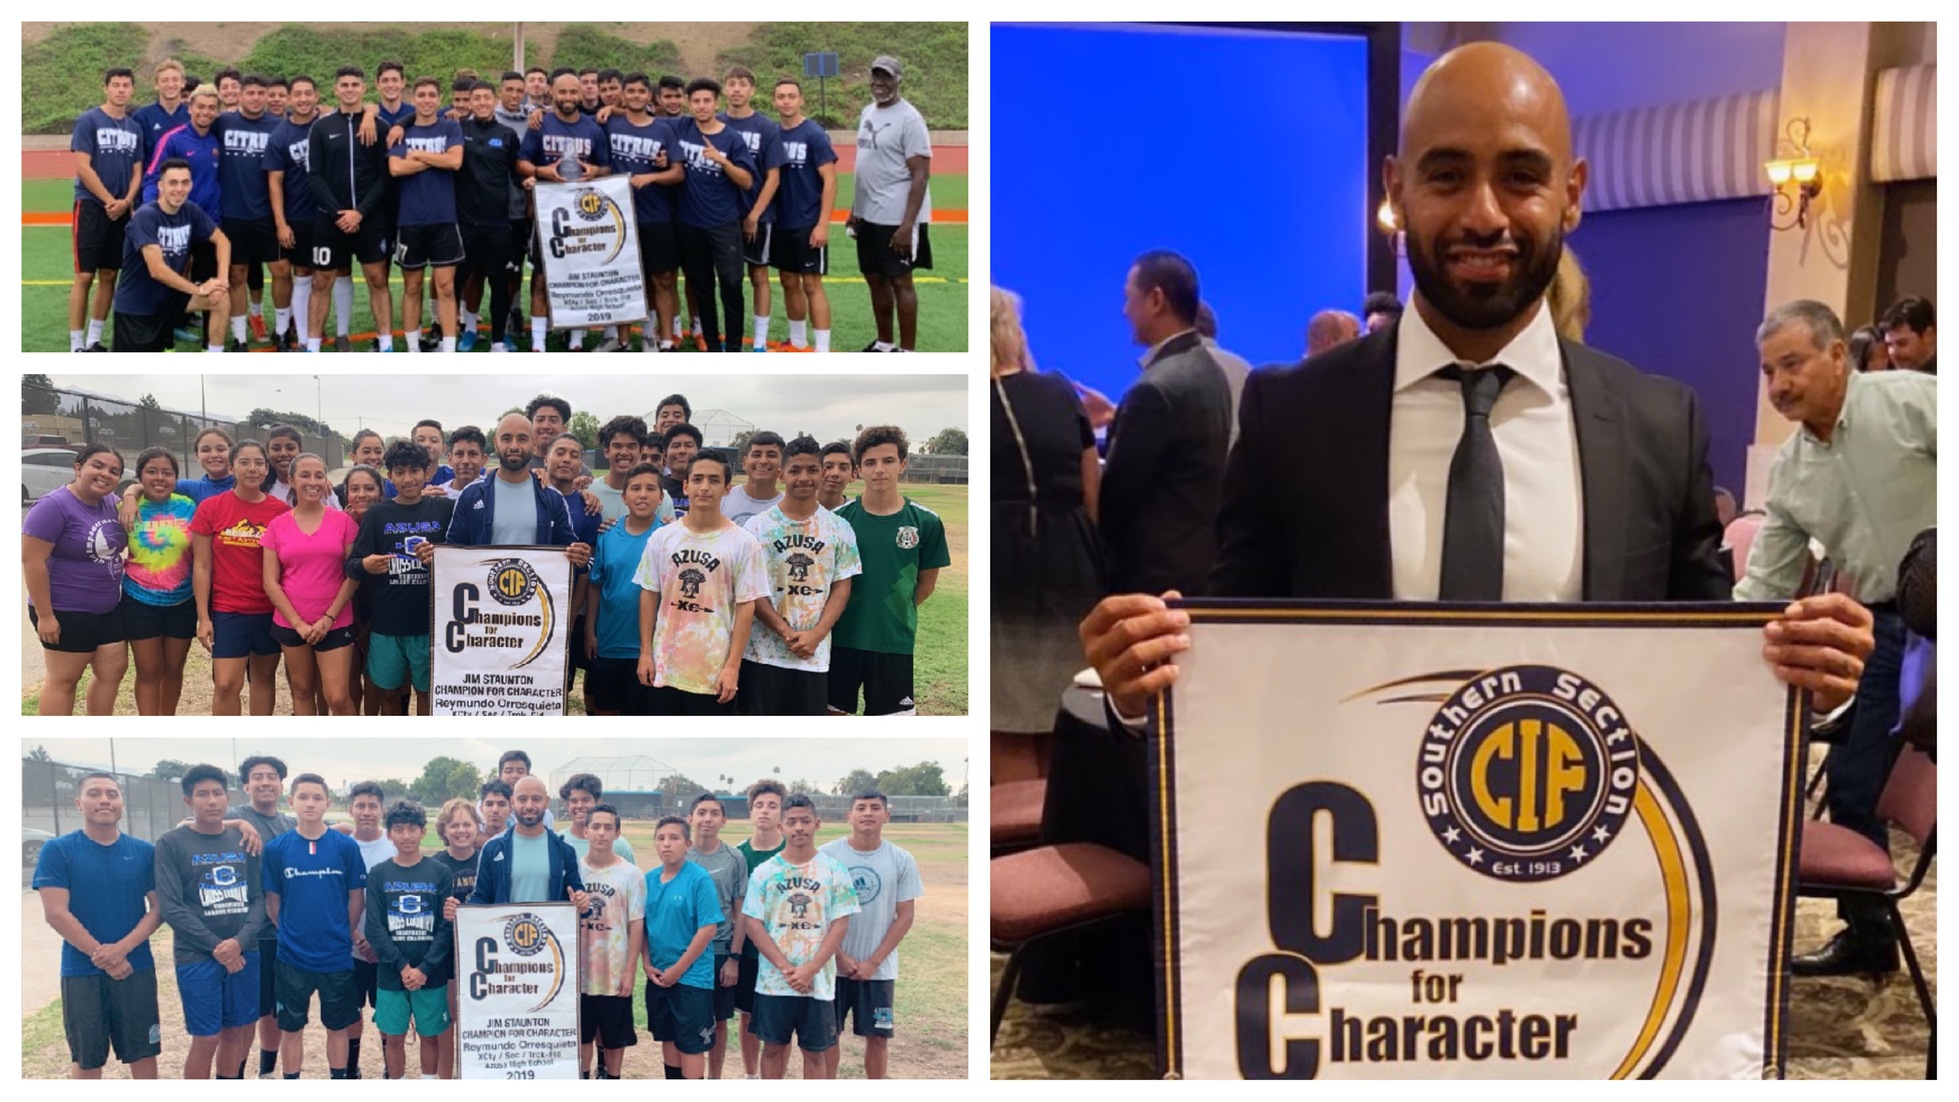 Pictured (clockwise starting from the upper left: Orrosquieta with his Citrus Men's Soccer teammates, receiving his banner at the banquet, with his Azusa High School Boys Soccer team, with his Azusa High School Cross Country team.